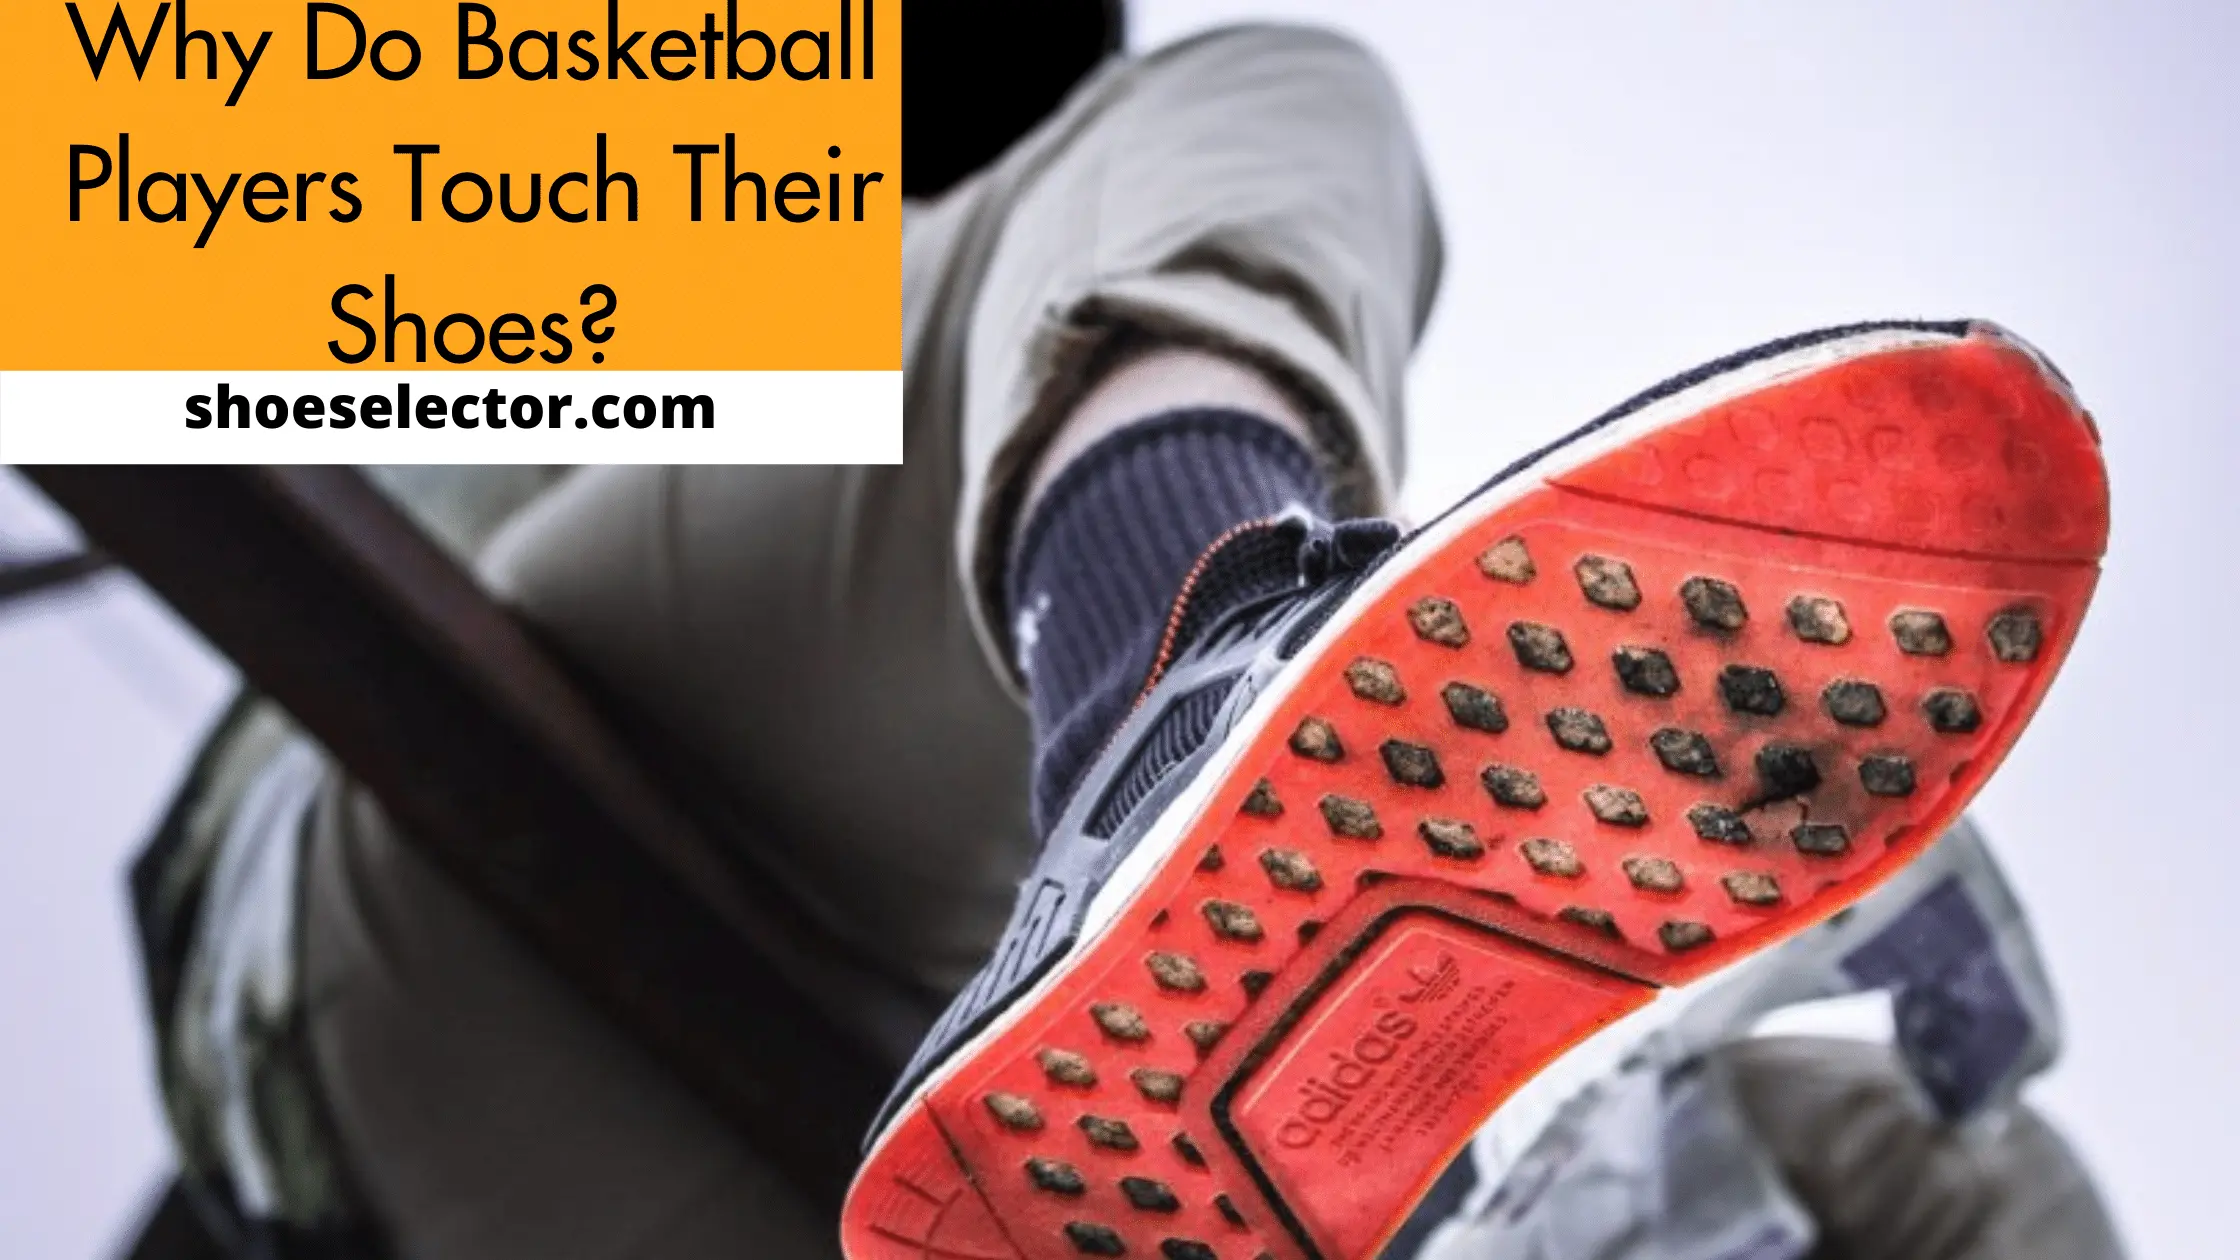 Why do Basketball Players Touch Their Shoes? #1 Guide